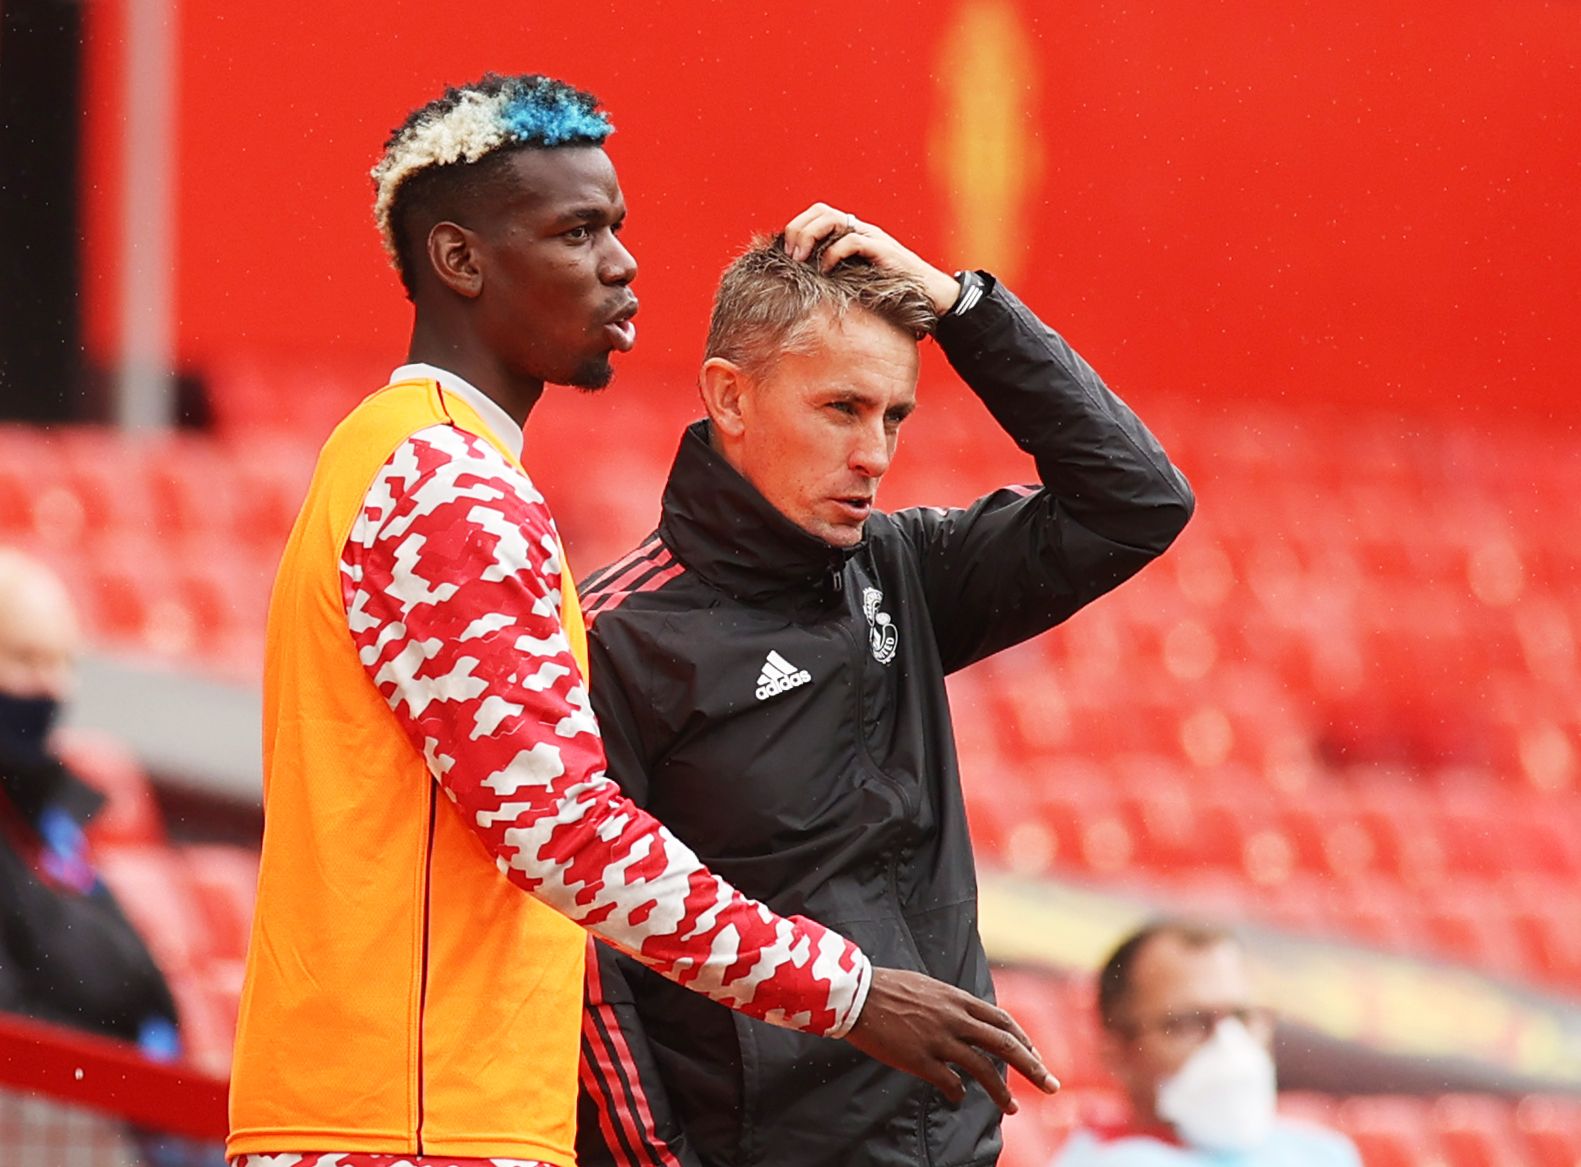 Soccer Football - Pre Season Friendly - Manchester United v Everton - Old Trafford, Manchester, Britain - August 7, 2021 Manchester United's Paul Pogba with first team coach Kieran McKenna Action Images via Reuters/Lee Smith